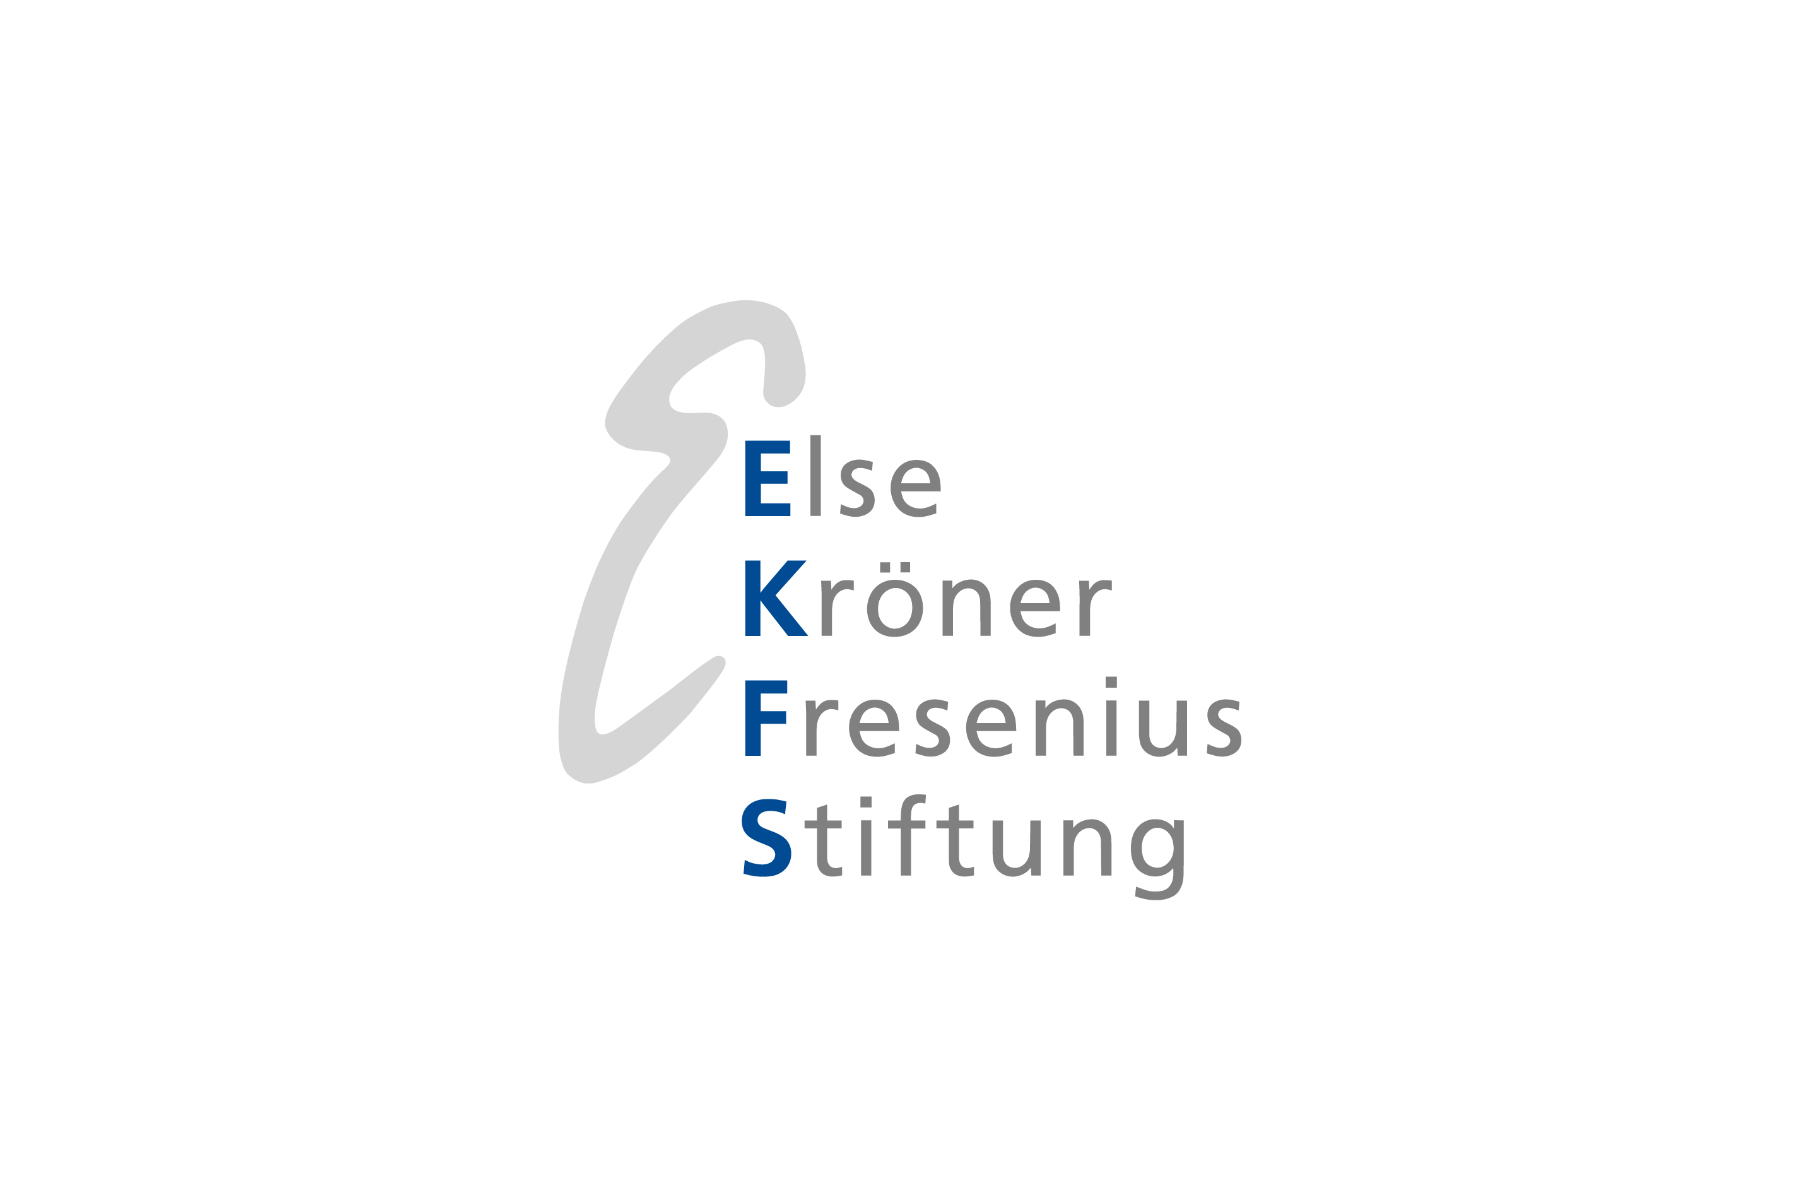 [Translate to English:] The picture shows the logo of the Else-Krönert-Fresenius Stiftung.